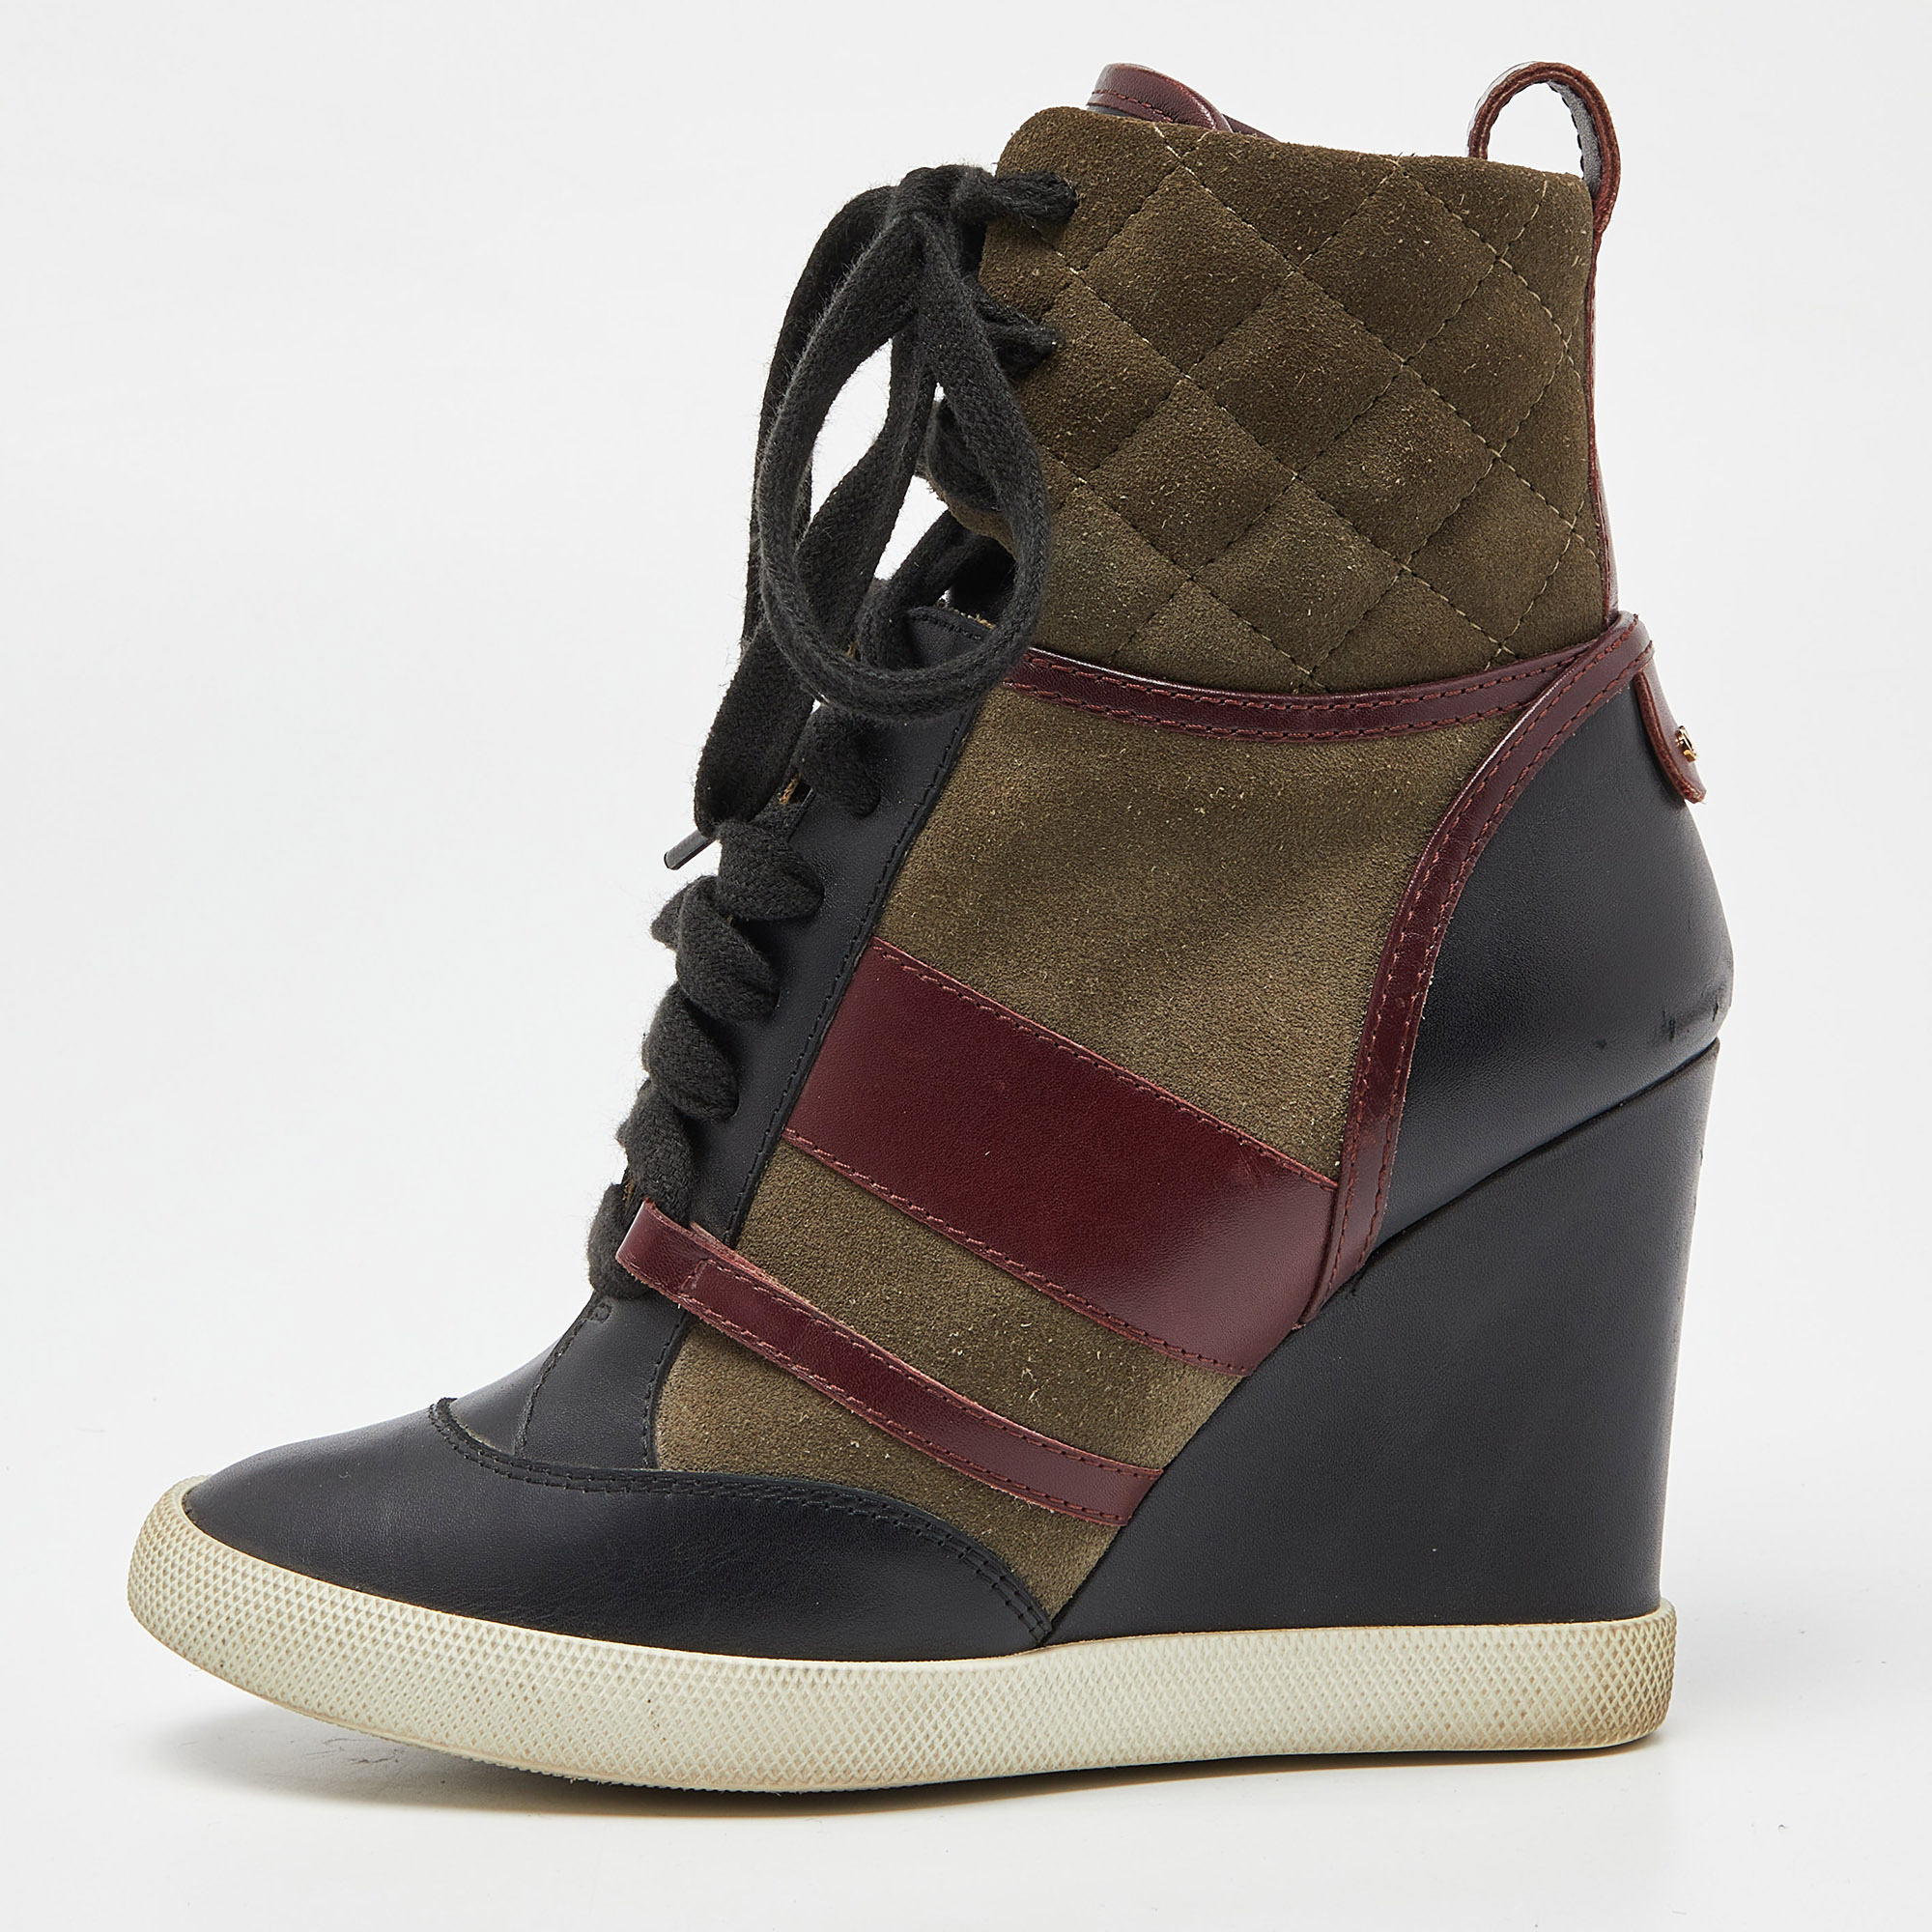 Chloe Tricolor Leather And Quilted Suede Wedge Sneaker Boots Size 37